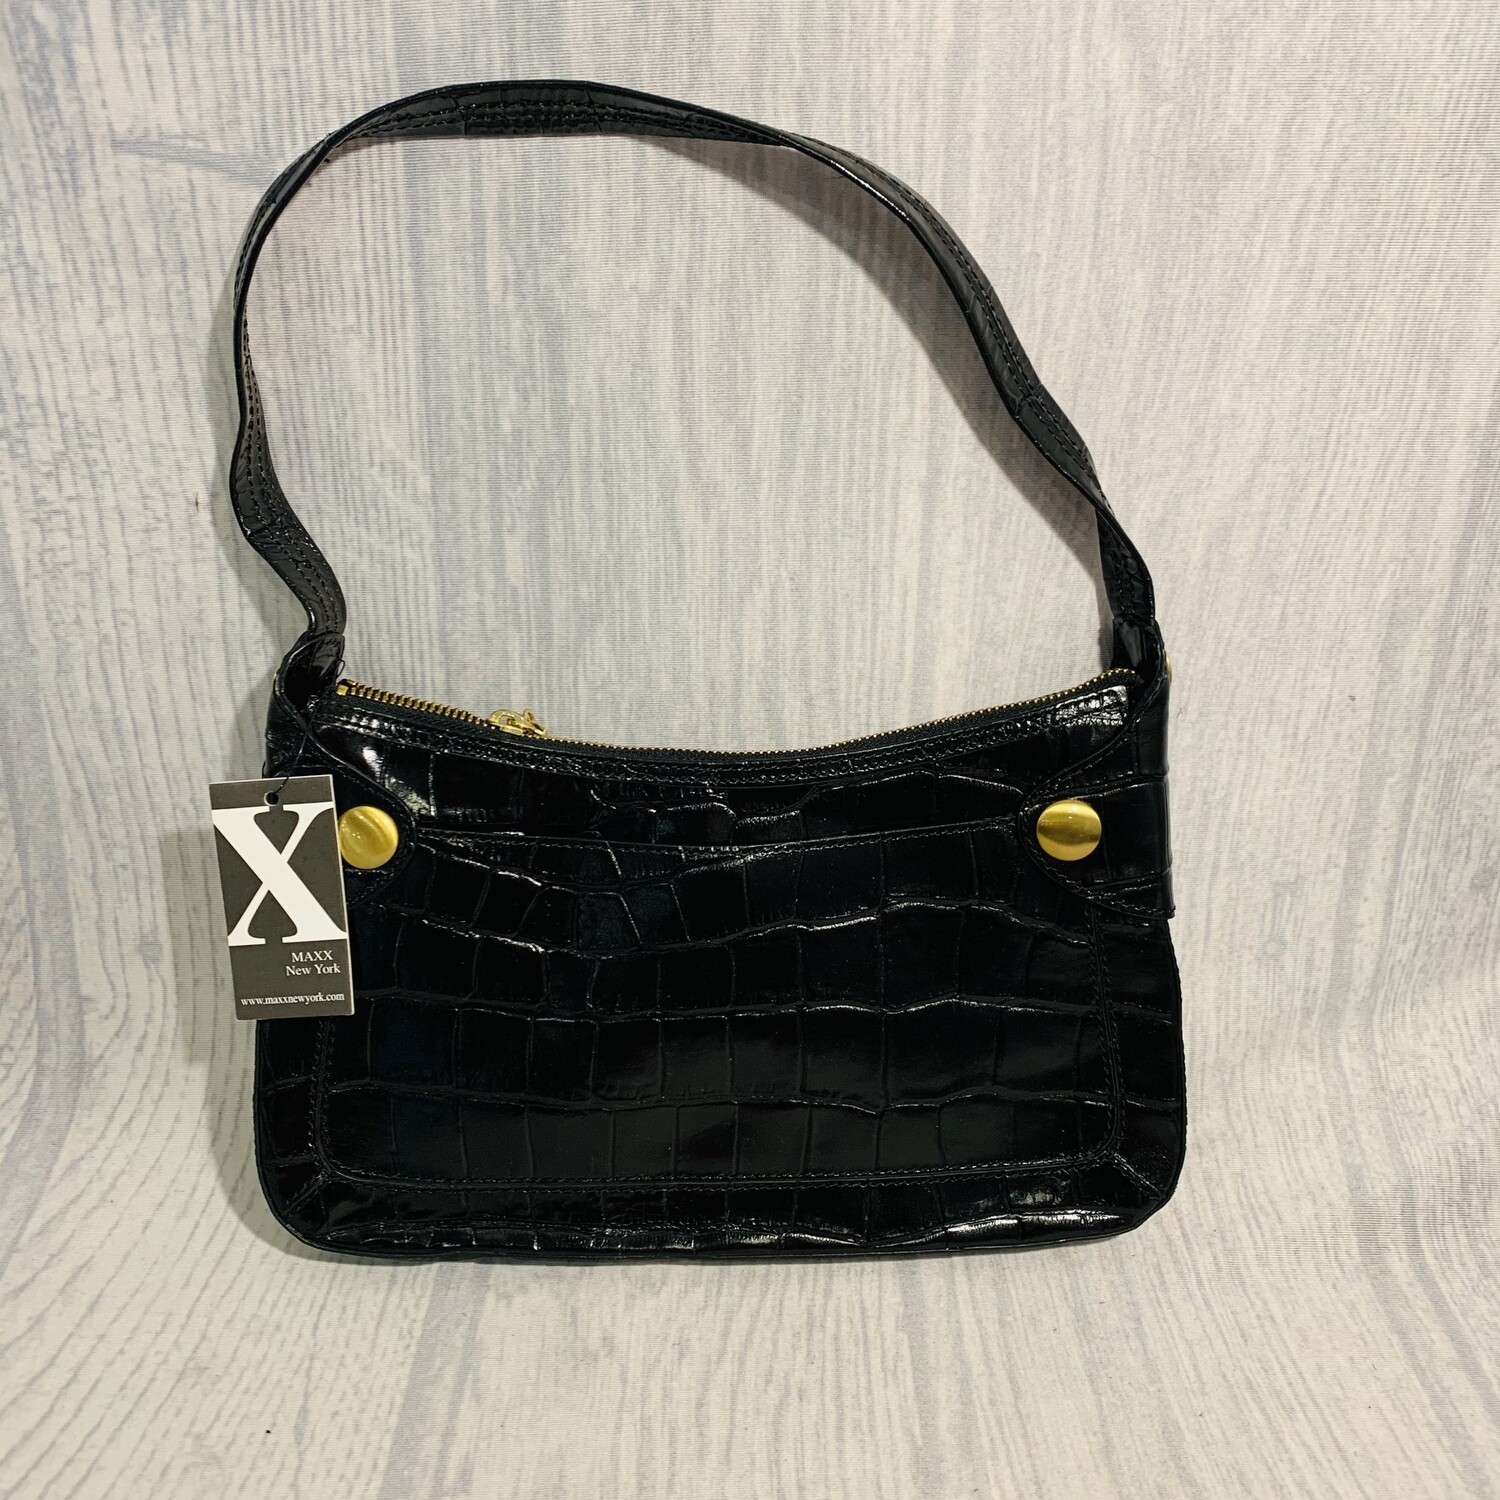 Maxx New York Croco Embossed Leather Shoulder Bag